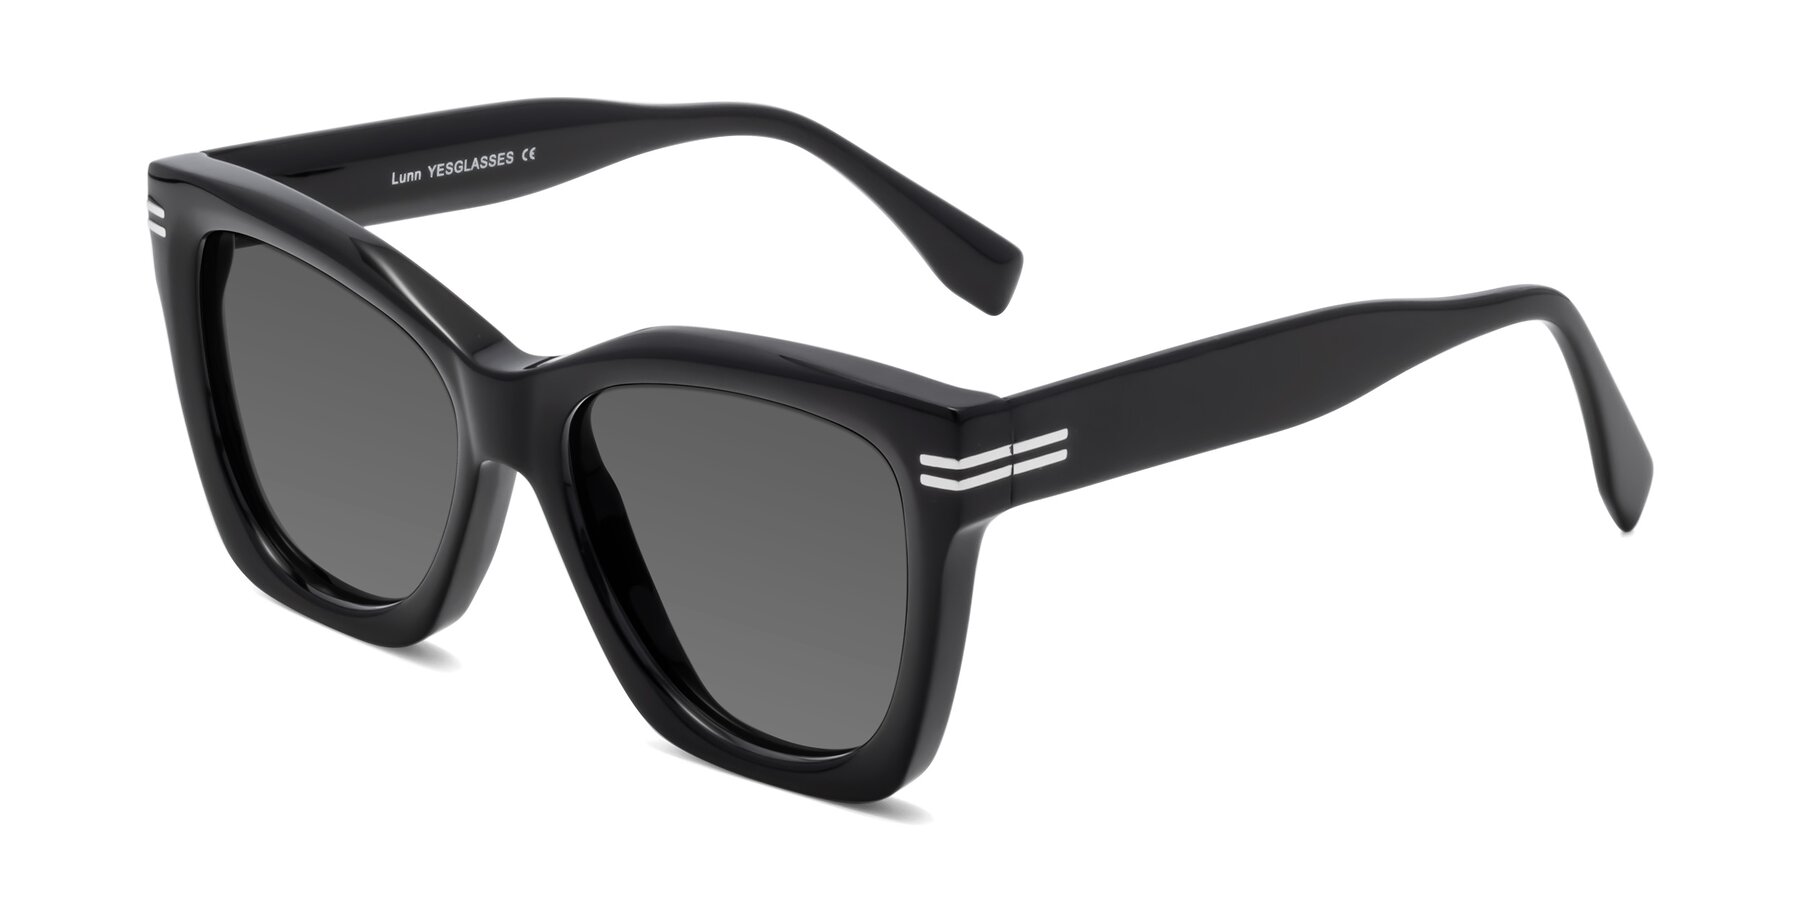 Angle of Lunn in Black with Medium Gray Tinted Lenses